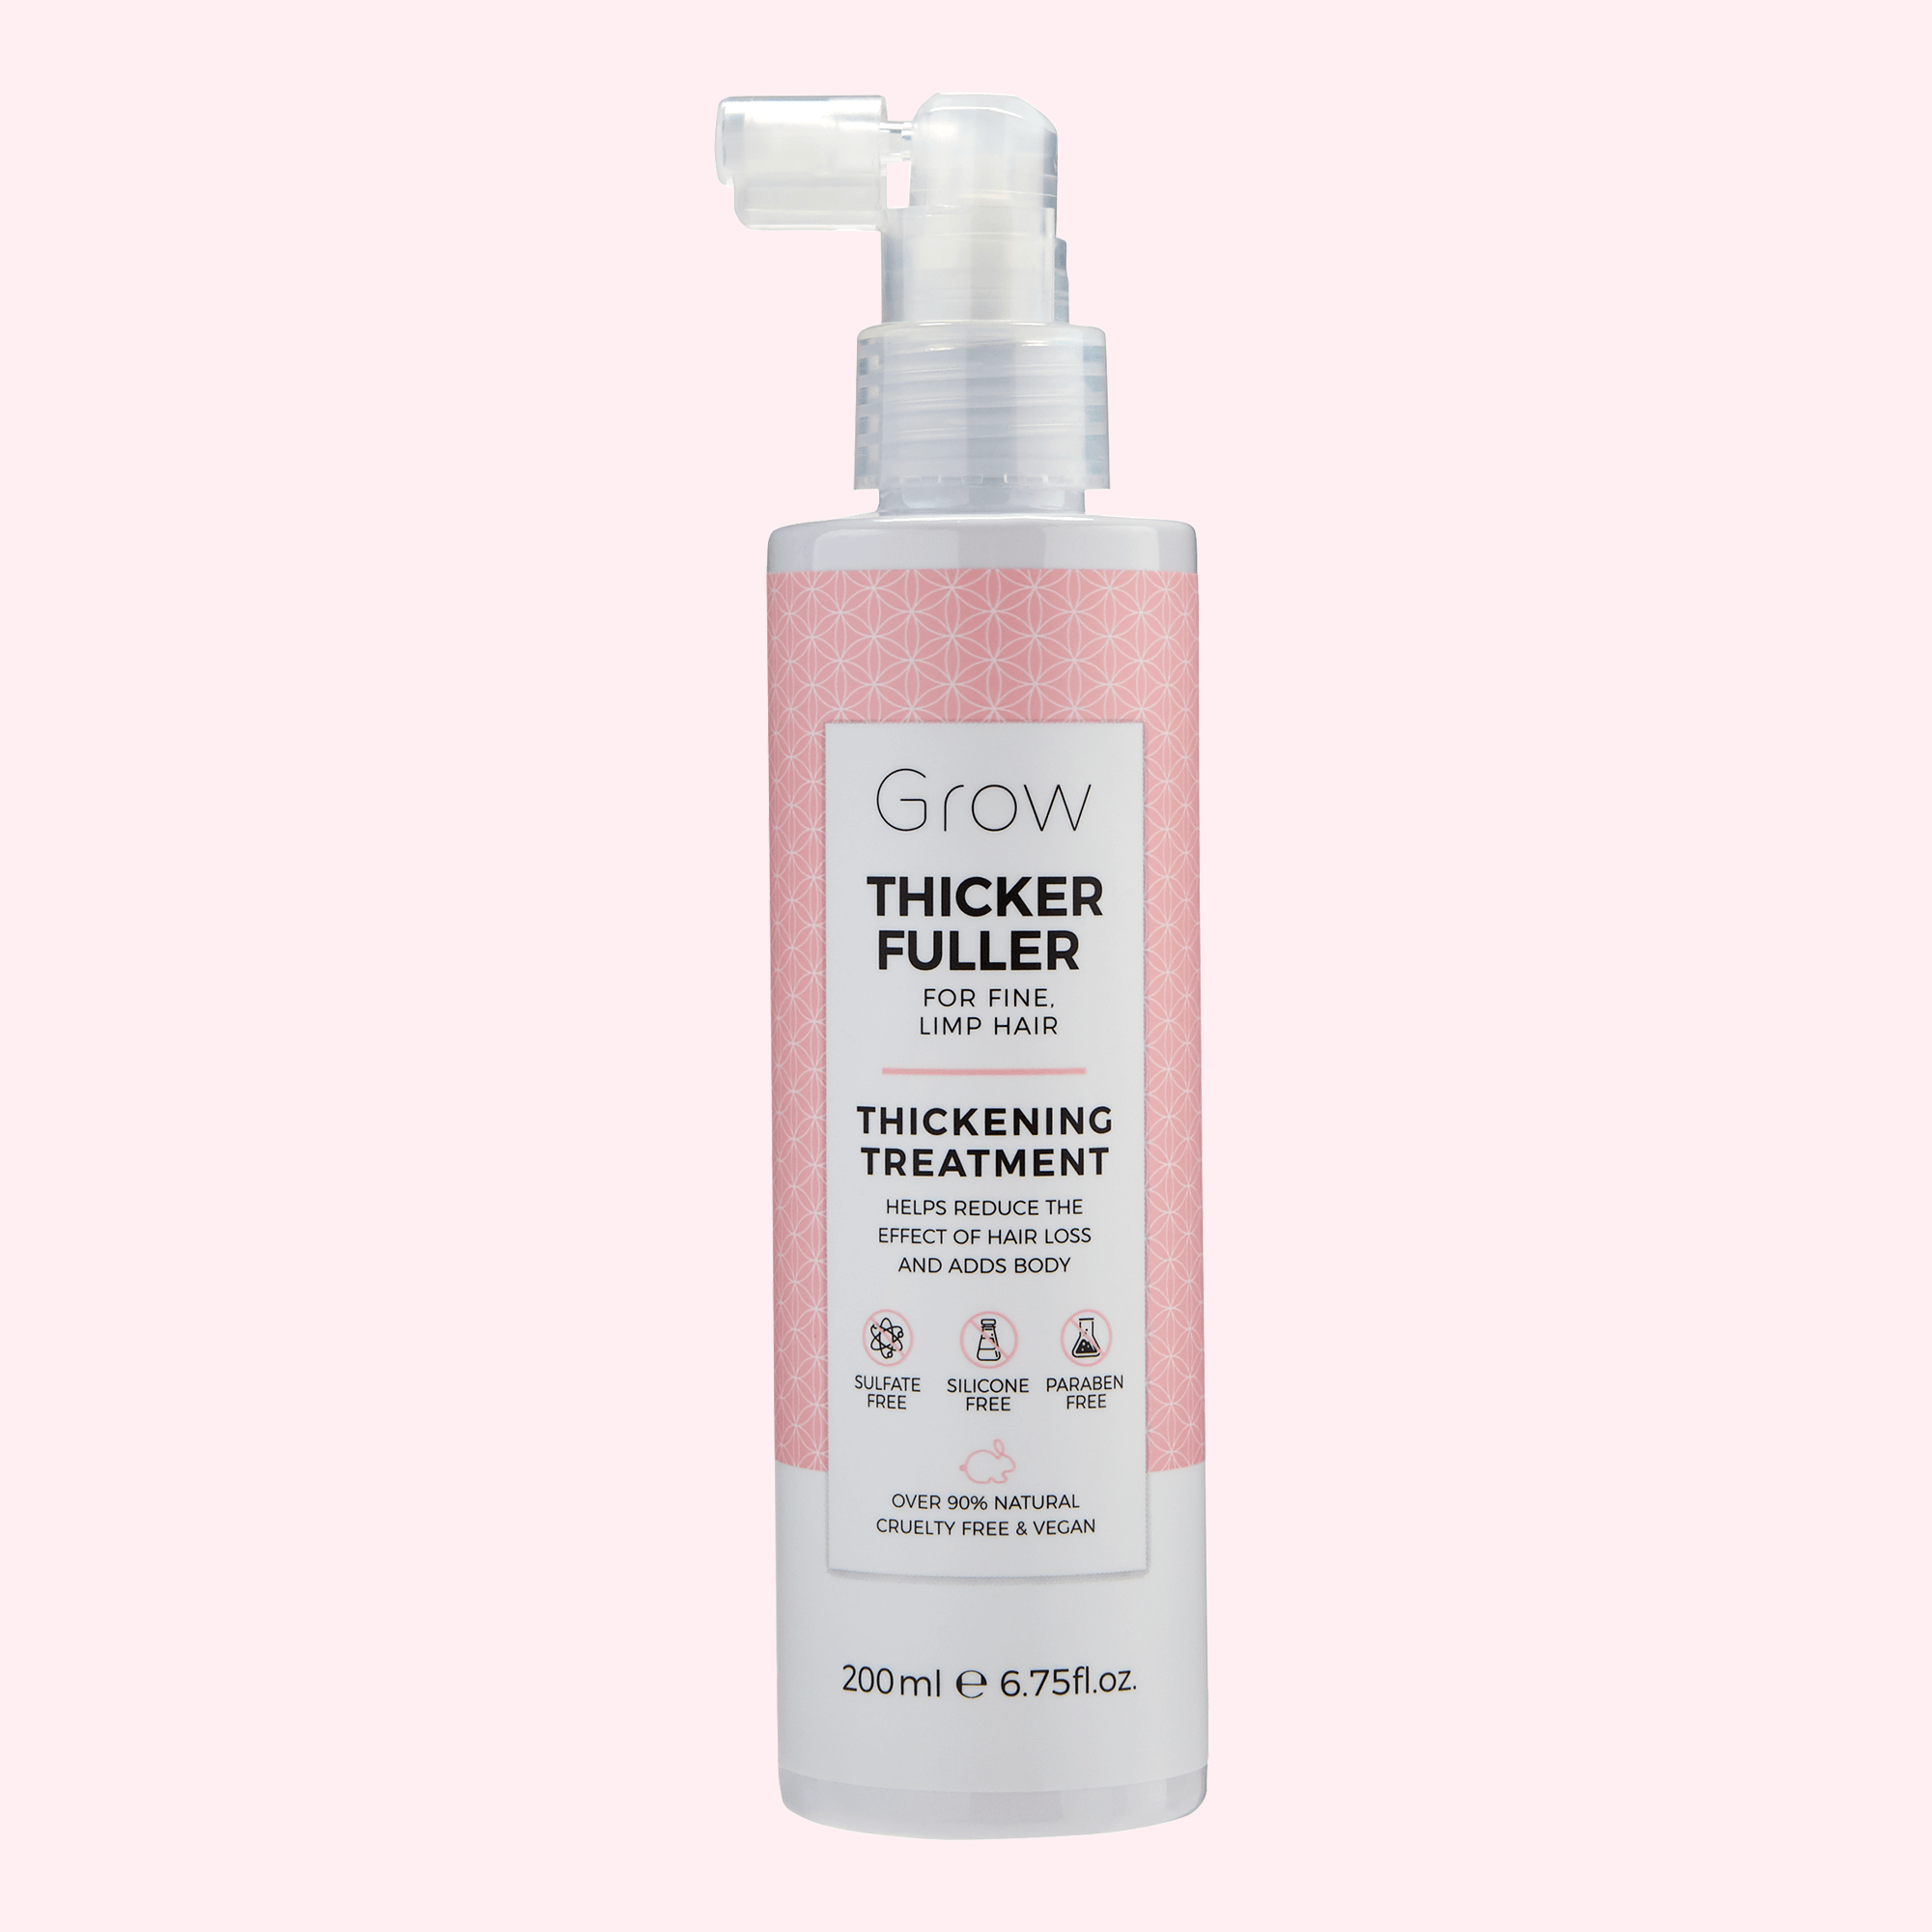 THICKER FULLER THICKENING TREATMENT200mL - Grow Haircare